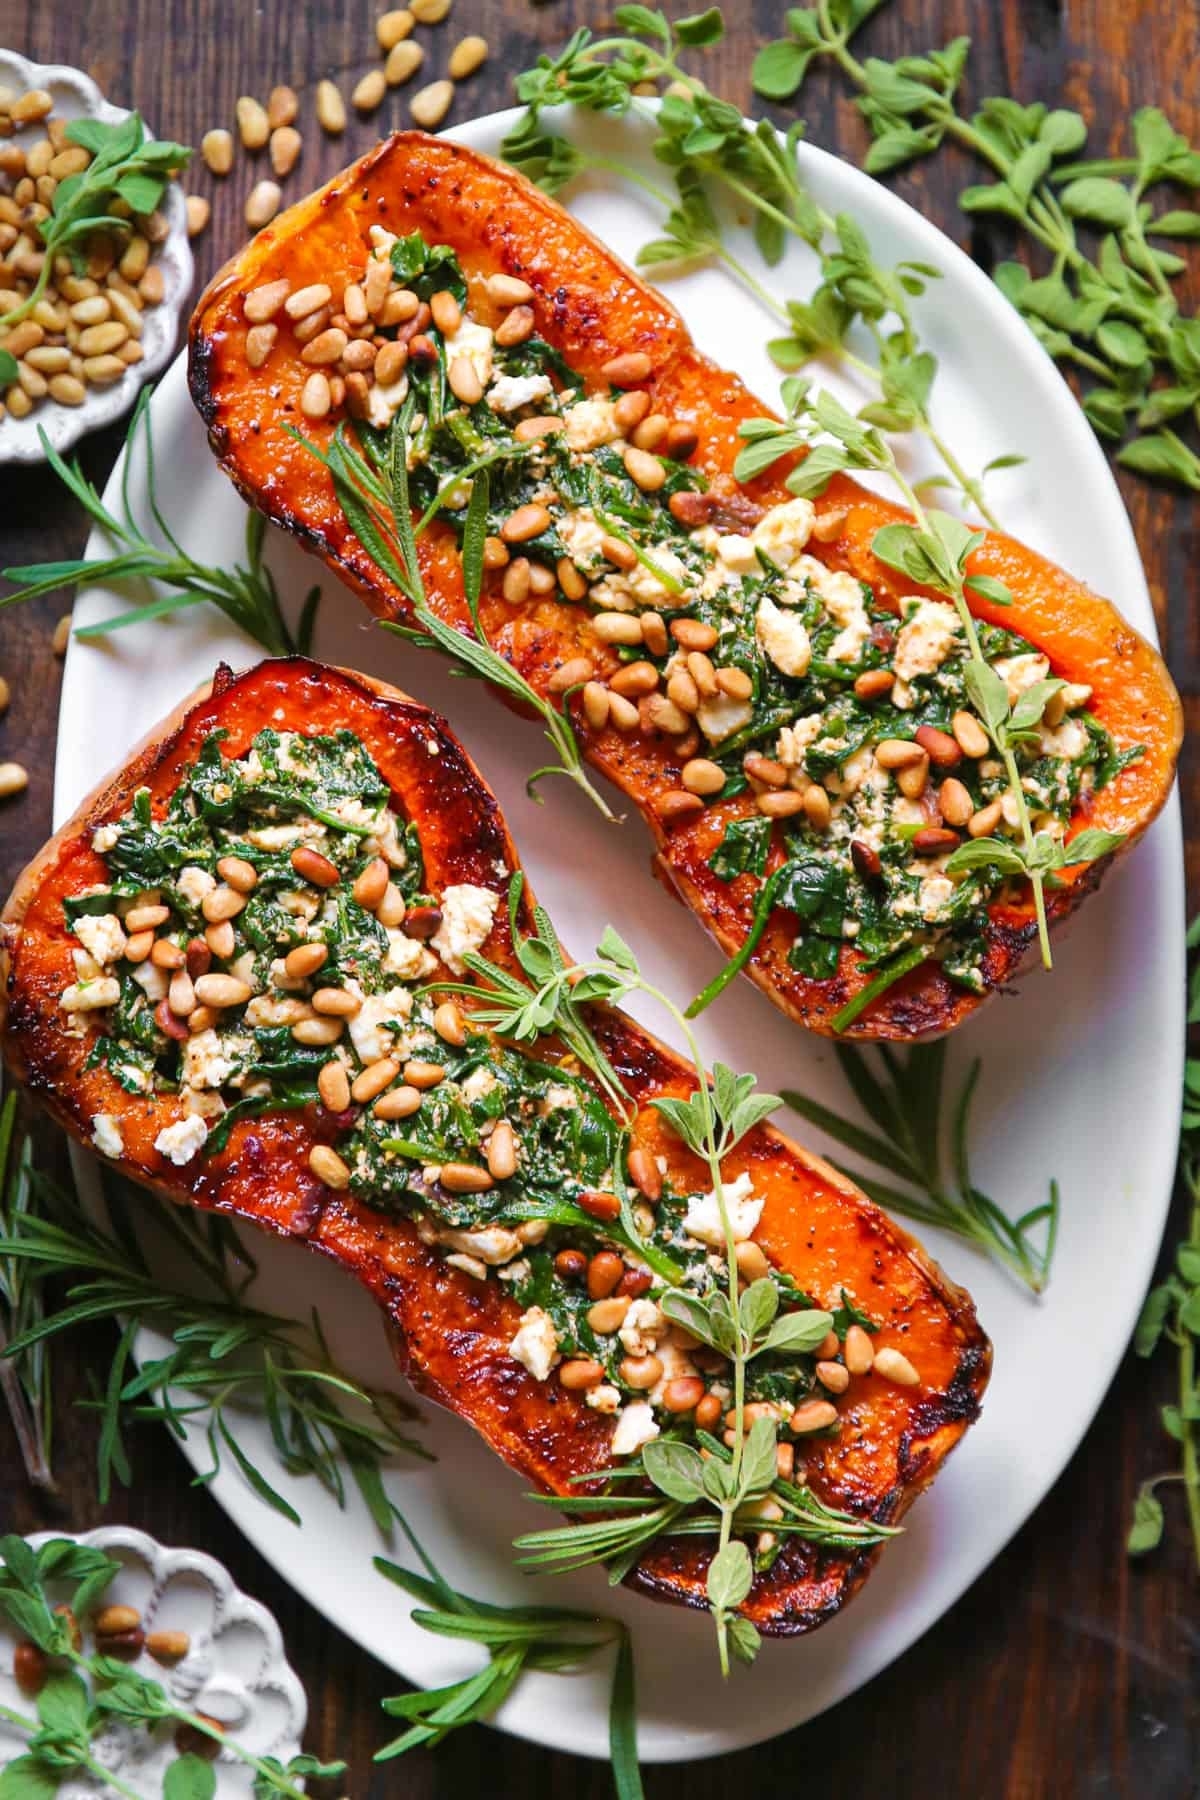 Two slices of roasted butternut squash stuffed with feta, spinach, and pine nuts